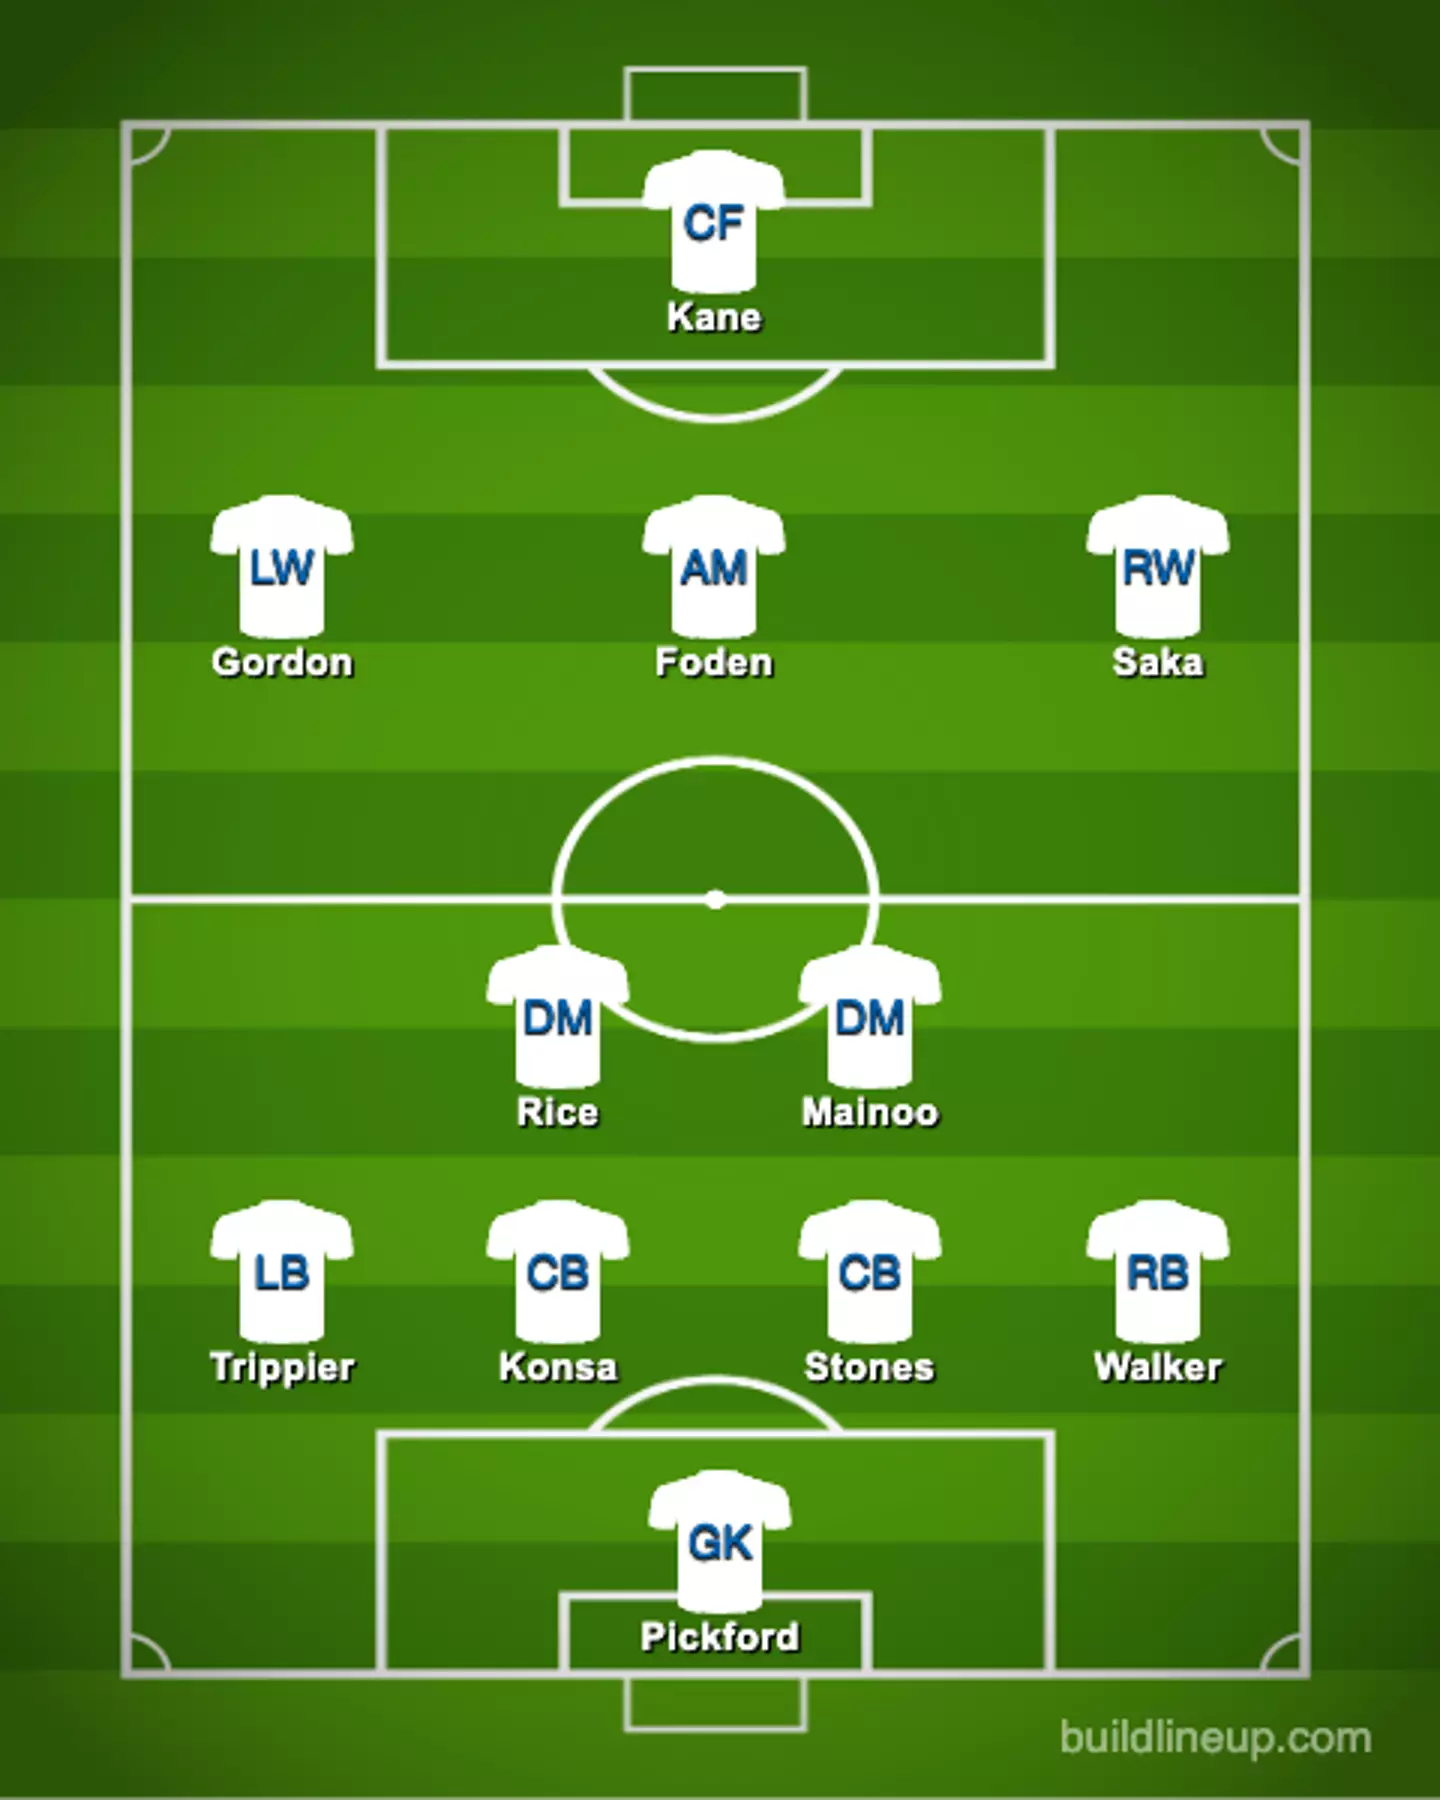 How England could line up against Switzerland on Saturday. [Buildlineup.com]